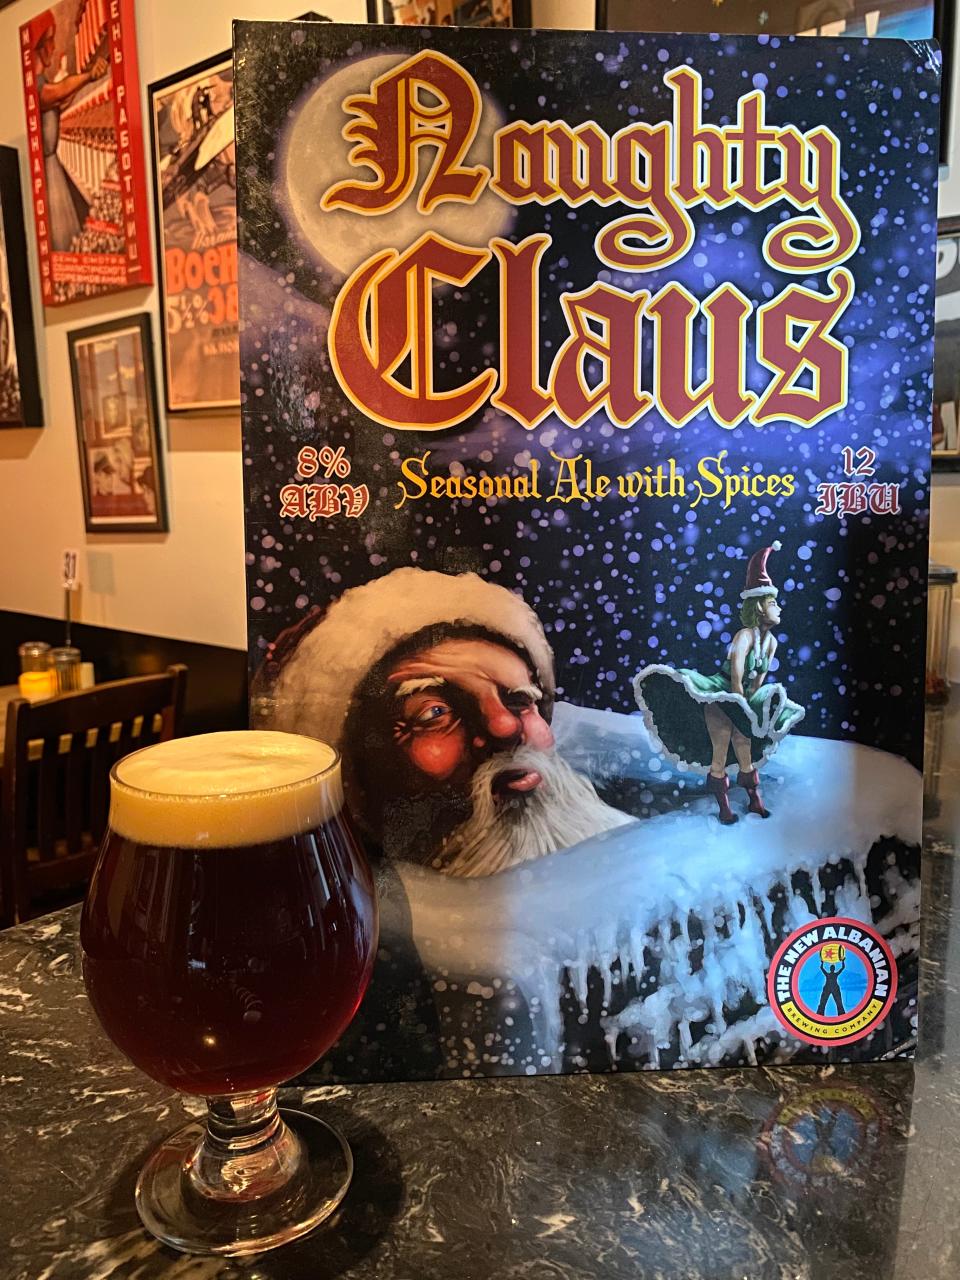 Naughty Claus has been brewed at The New Albanian Brewing Company since 2009 and continues to be a seasonal favorite.